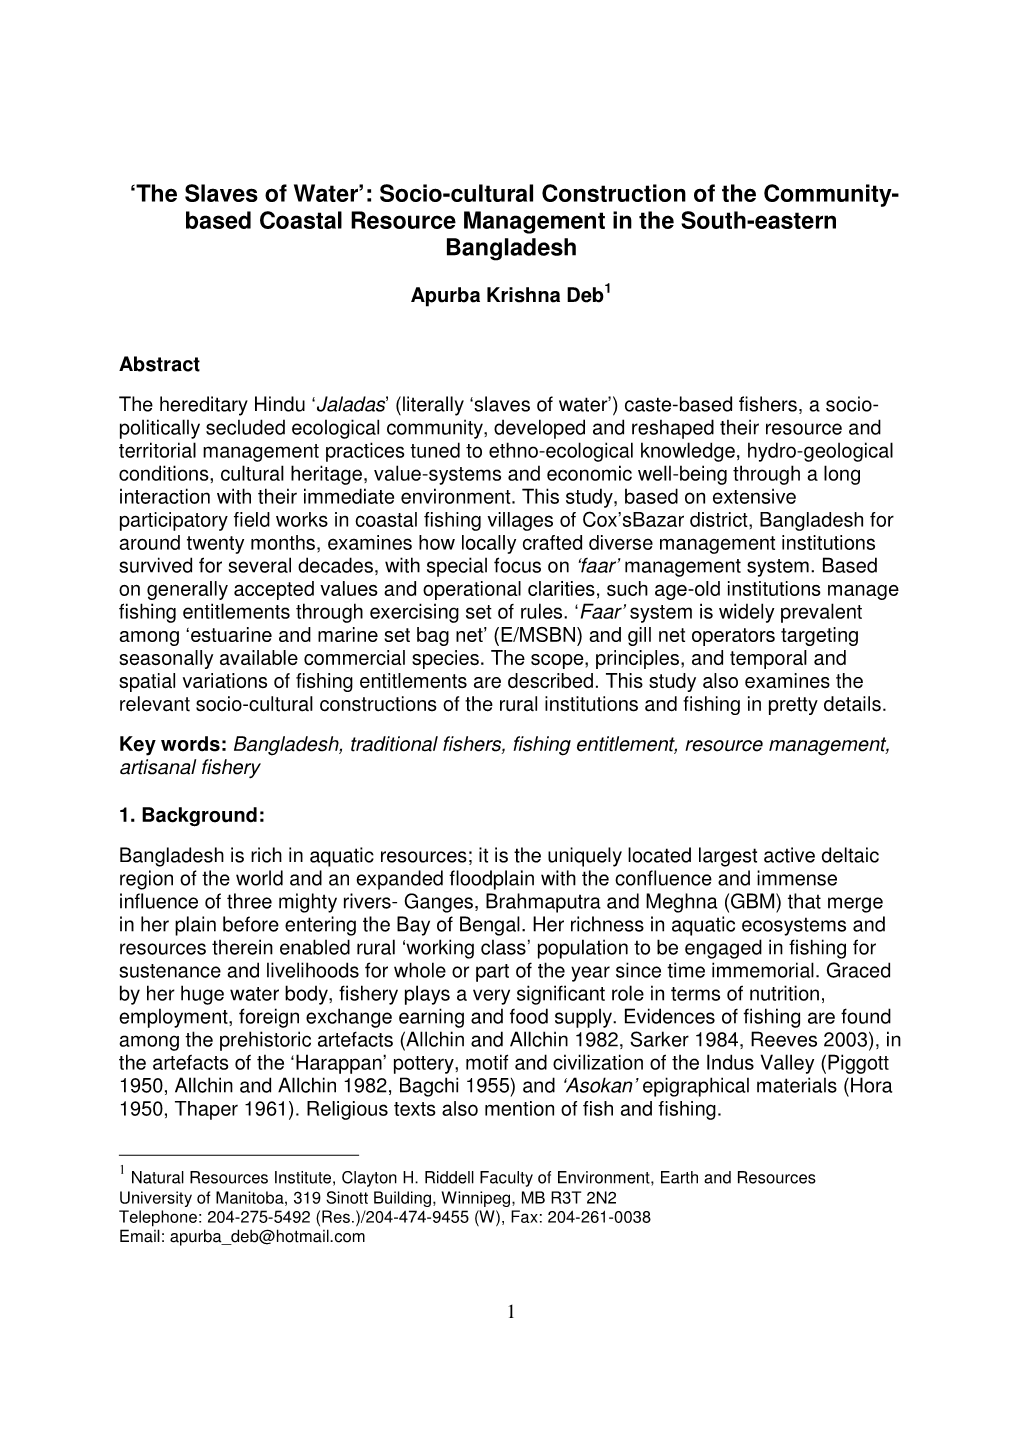 'The Slaves of Water': Socio-Cultural Construction of the Community- Based Coastal Resource Management in the South-Eastern